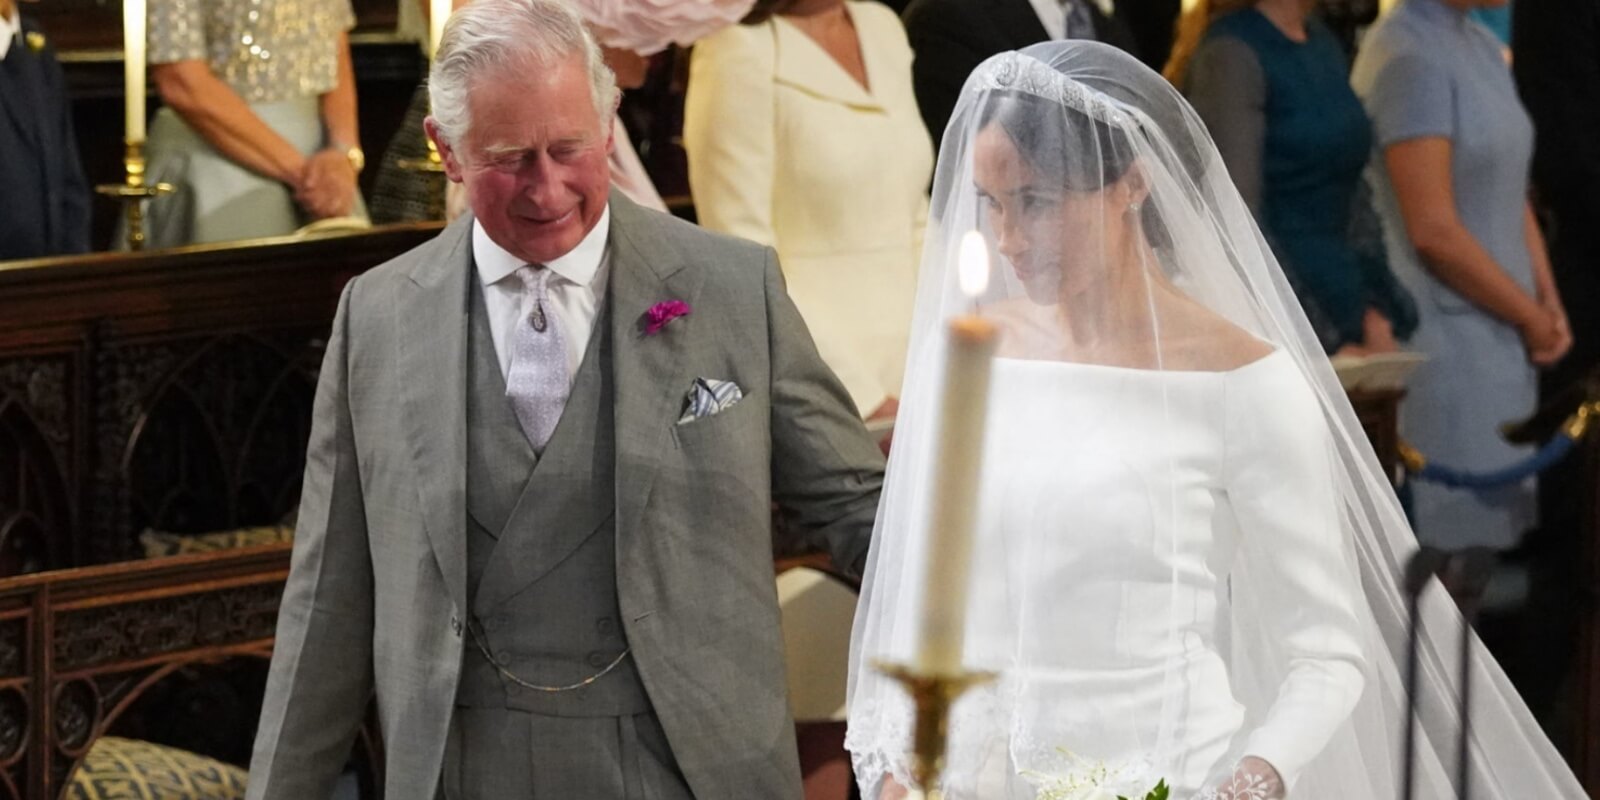 Meghan markle and King Charles on the day of her wedding to his son, Prince Harry in May 2018.